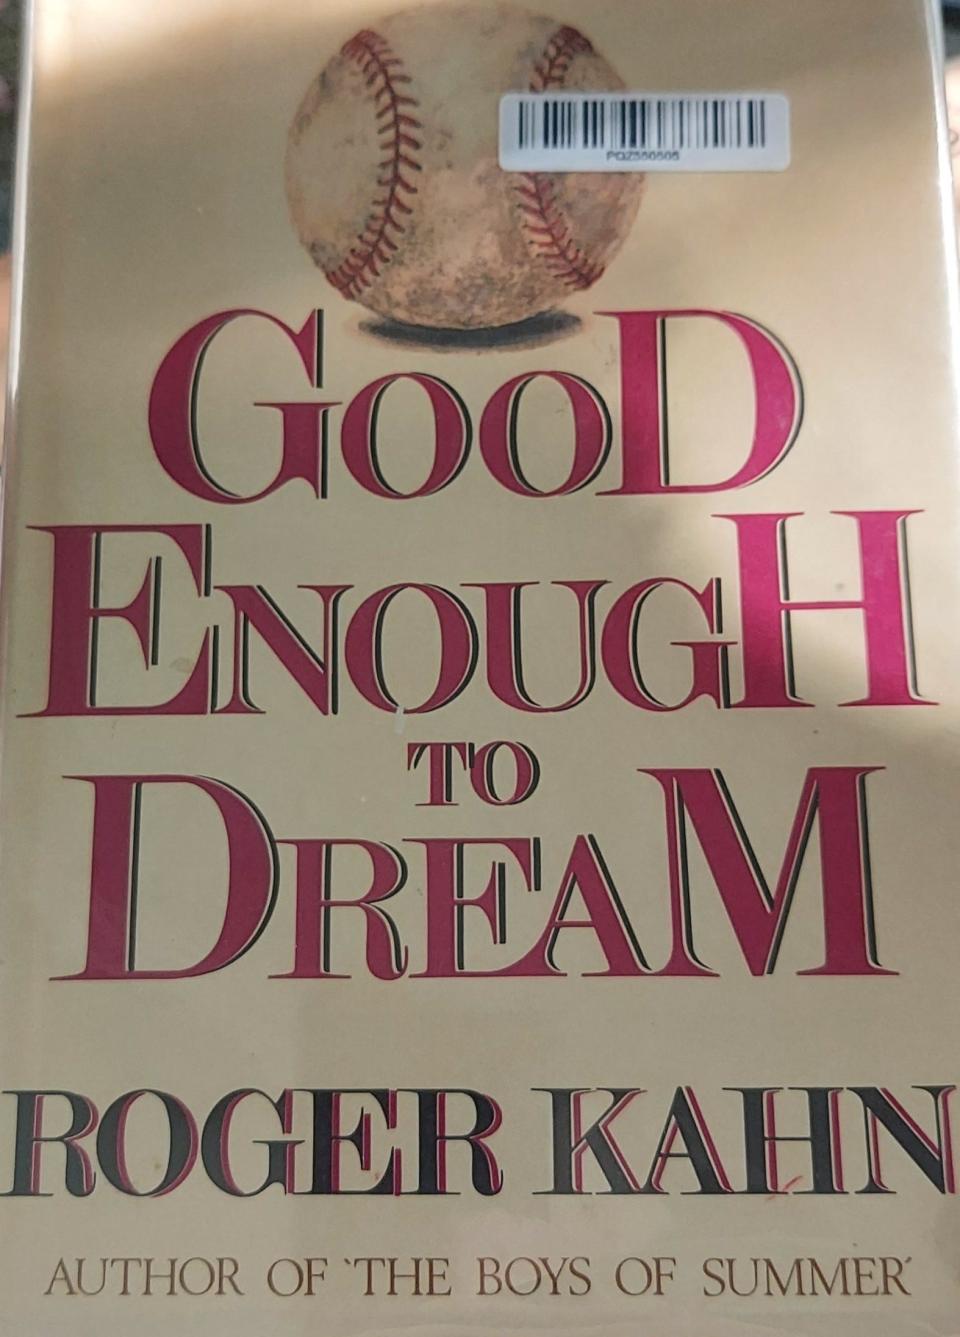 The 1983 Utica Blue Sox season was captured in Good Enough to Dream, written by Roger Kahn who was a part owner of the team.